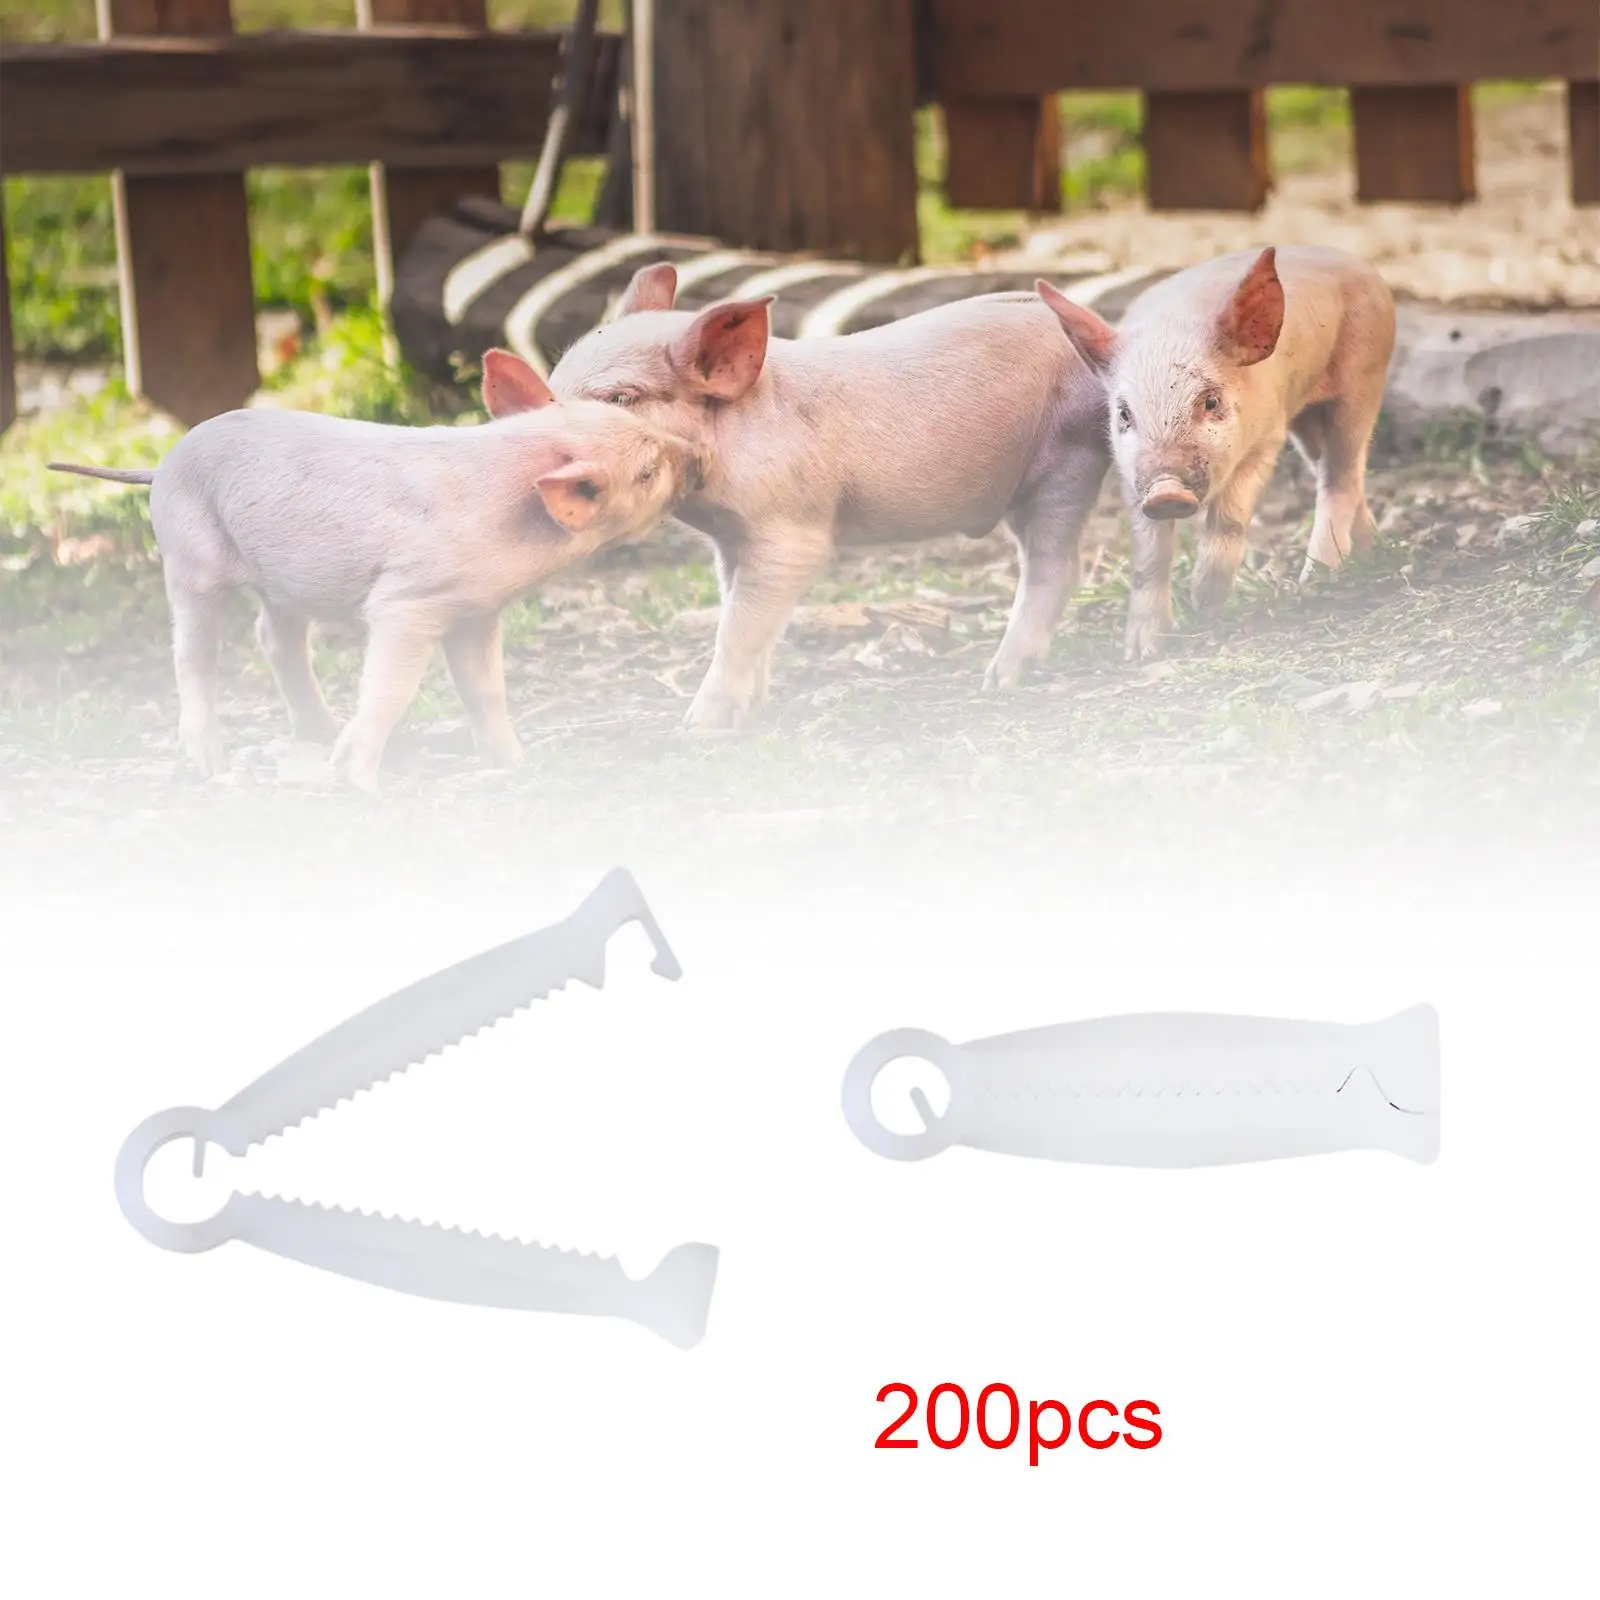 200 Pieces Livestock Birth Supplies Umbilical Cord Clamp Navel Cord Clamp for Pet for Pet Animals Pigs Sheep Farming sheep